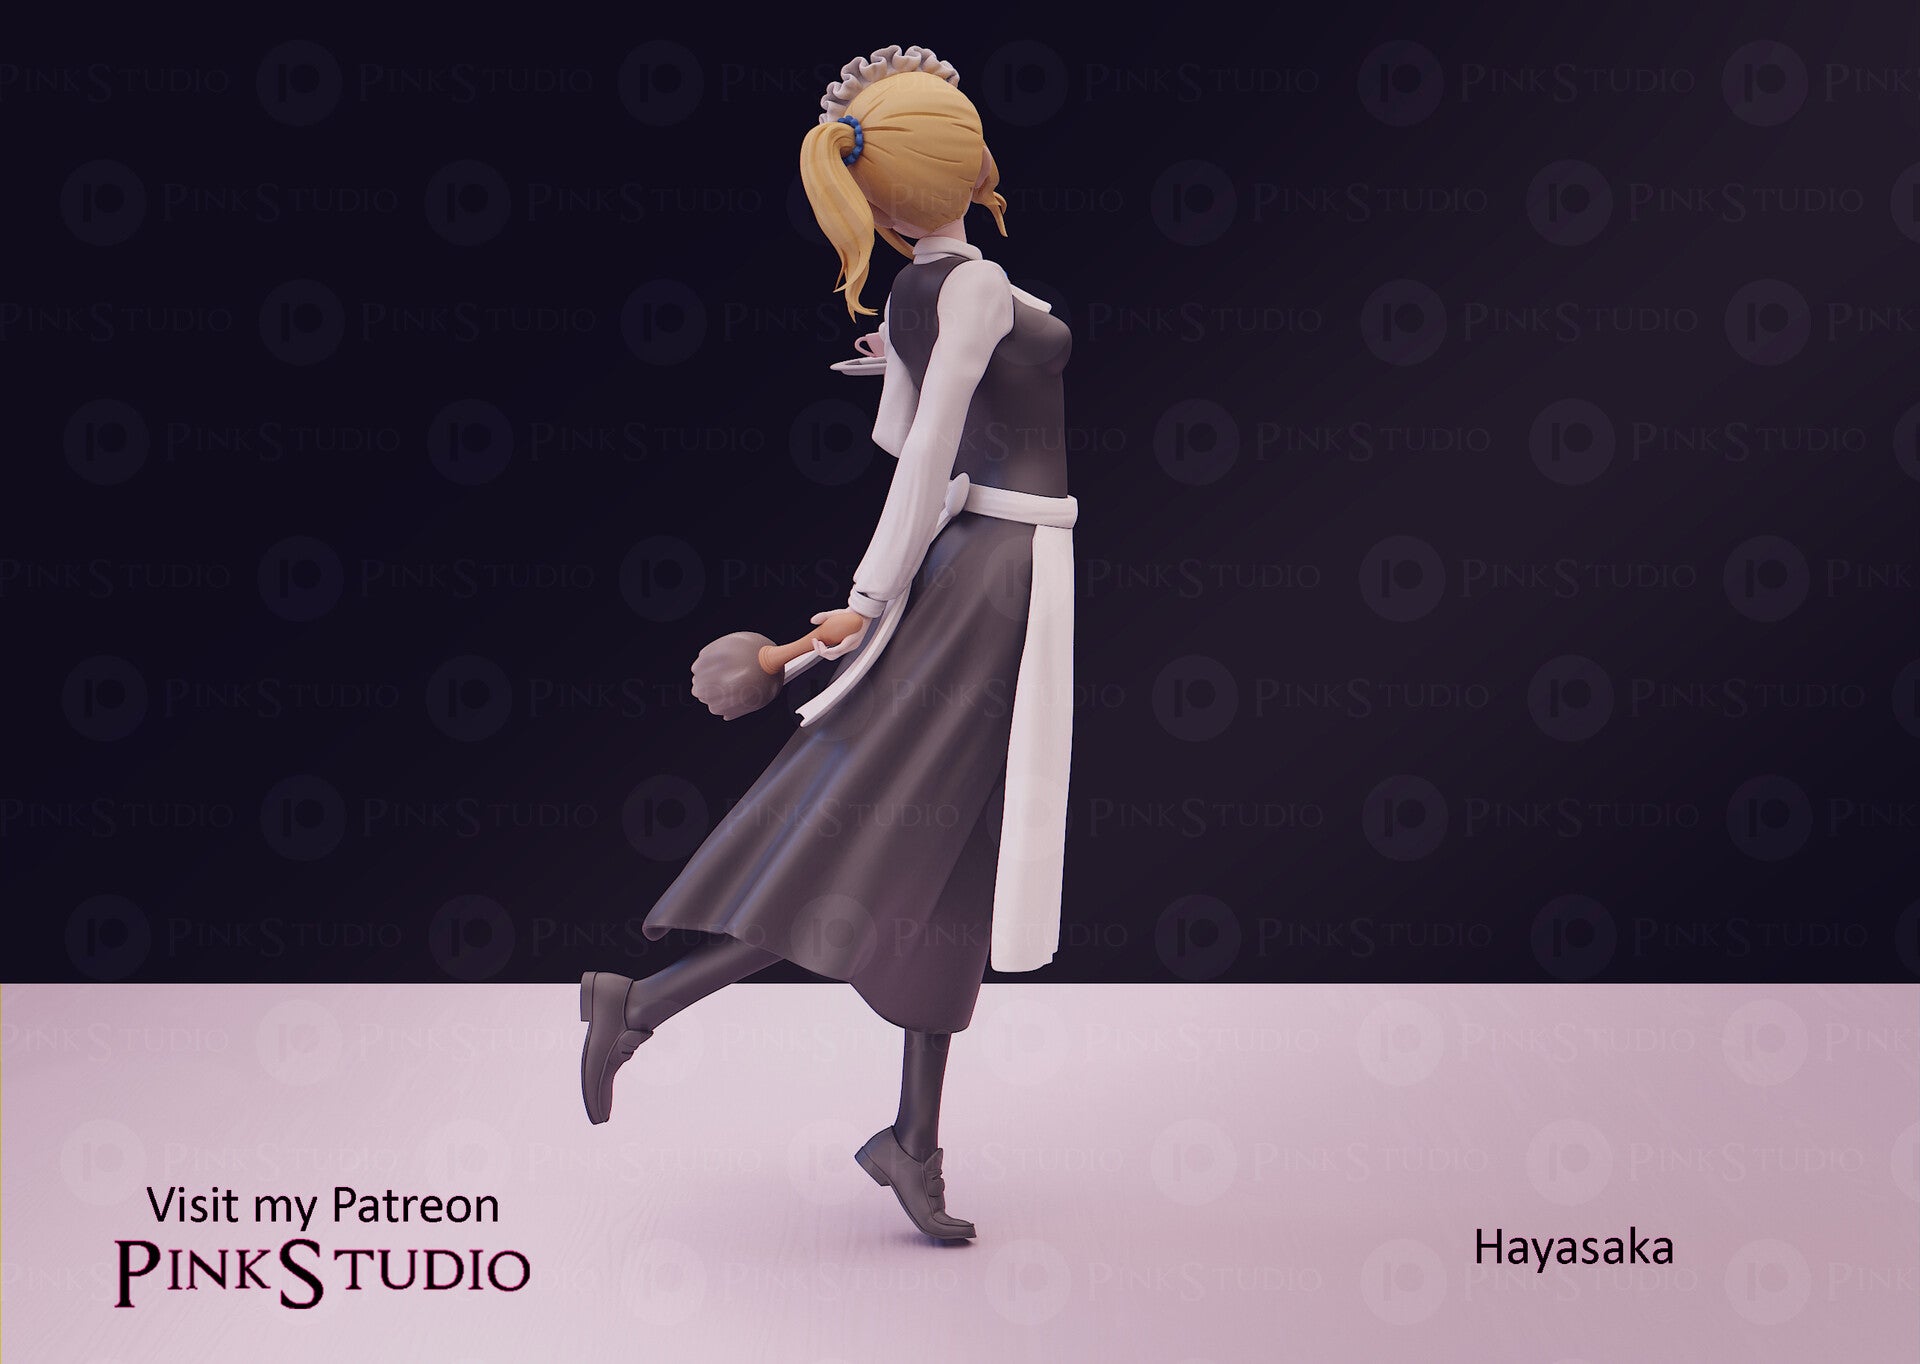 Saber - Fate Stay Night Anime Figurine for 3D Printing, 3D models download